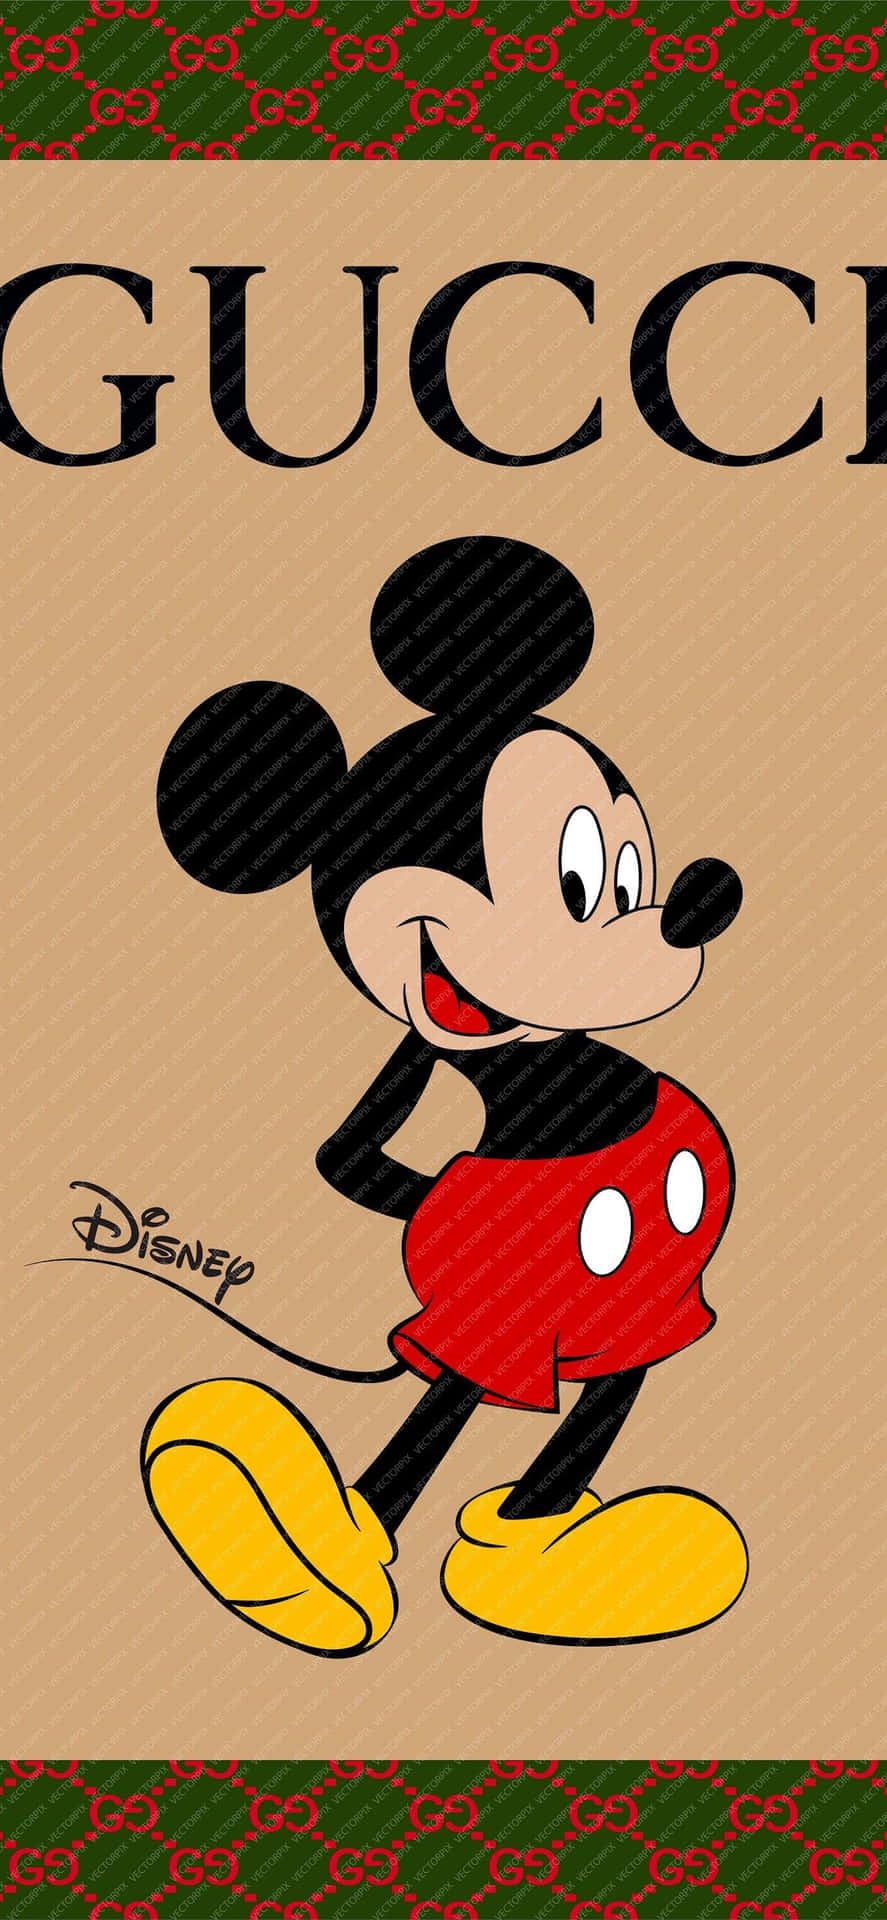 From His Ears to His Toes, Mickey is Ready to Go! Wallpaper